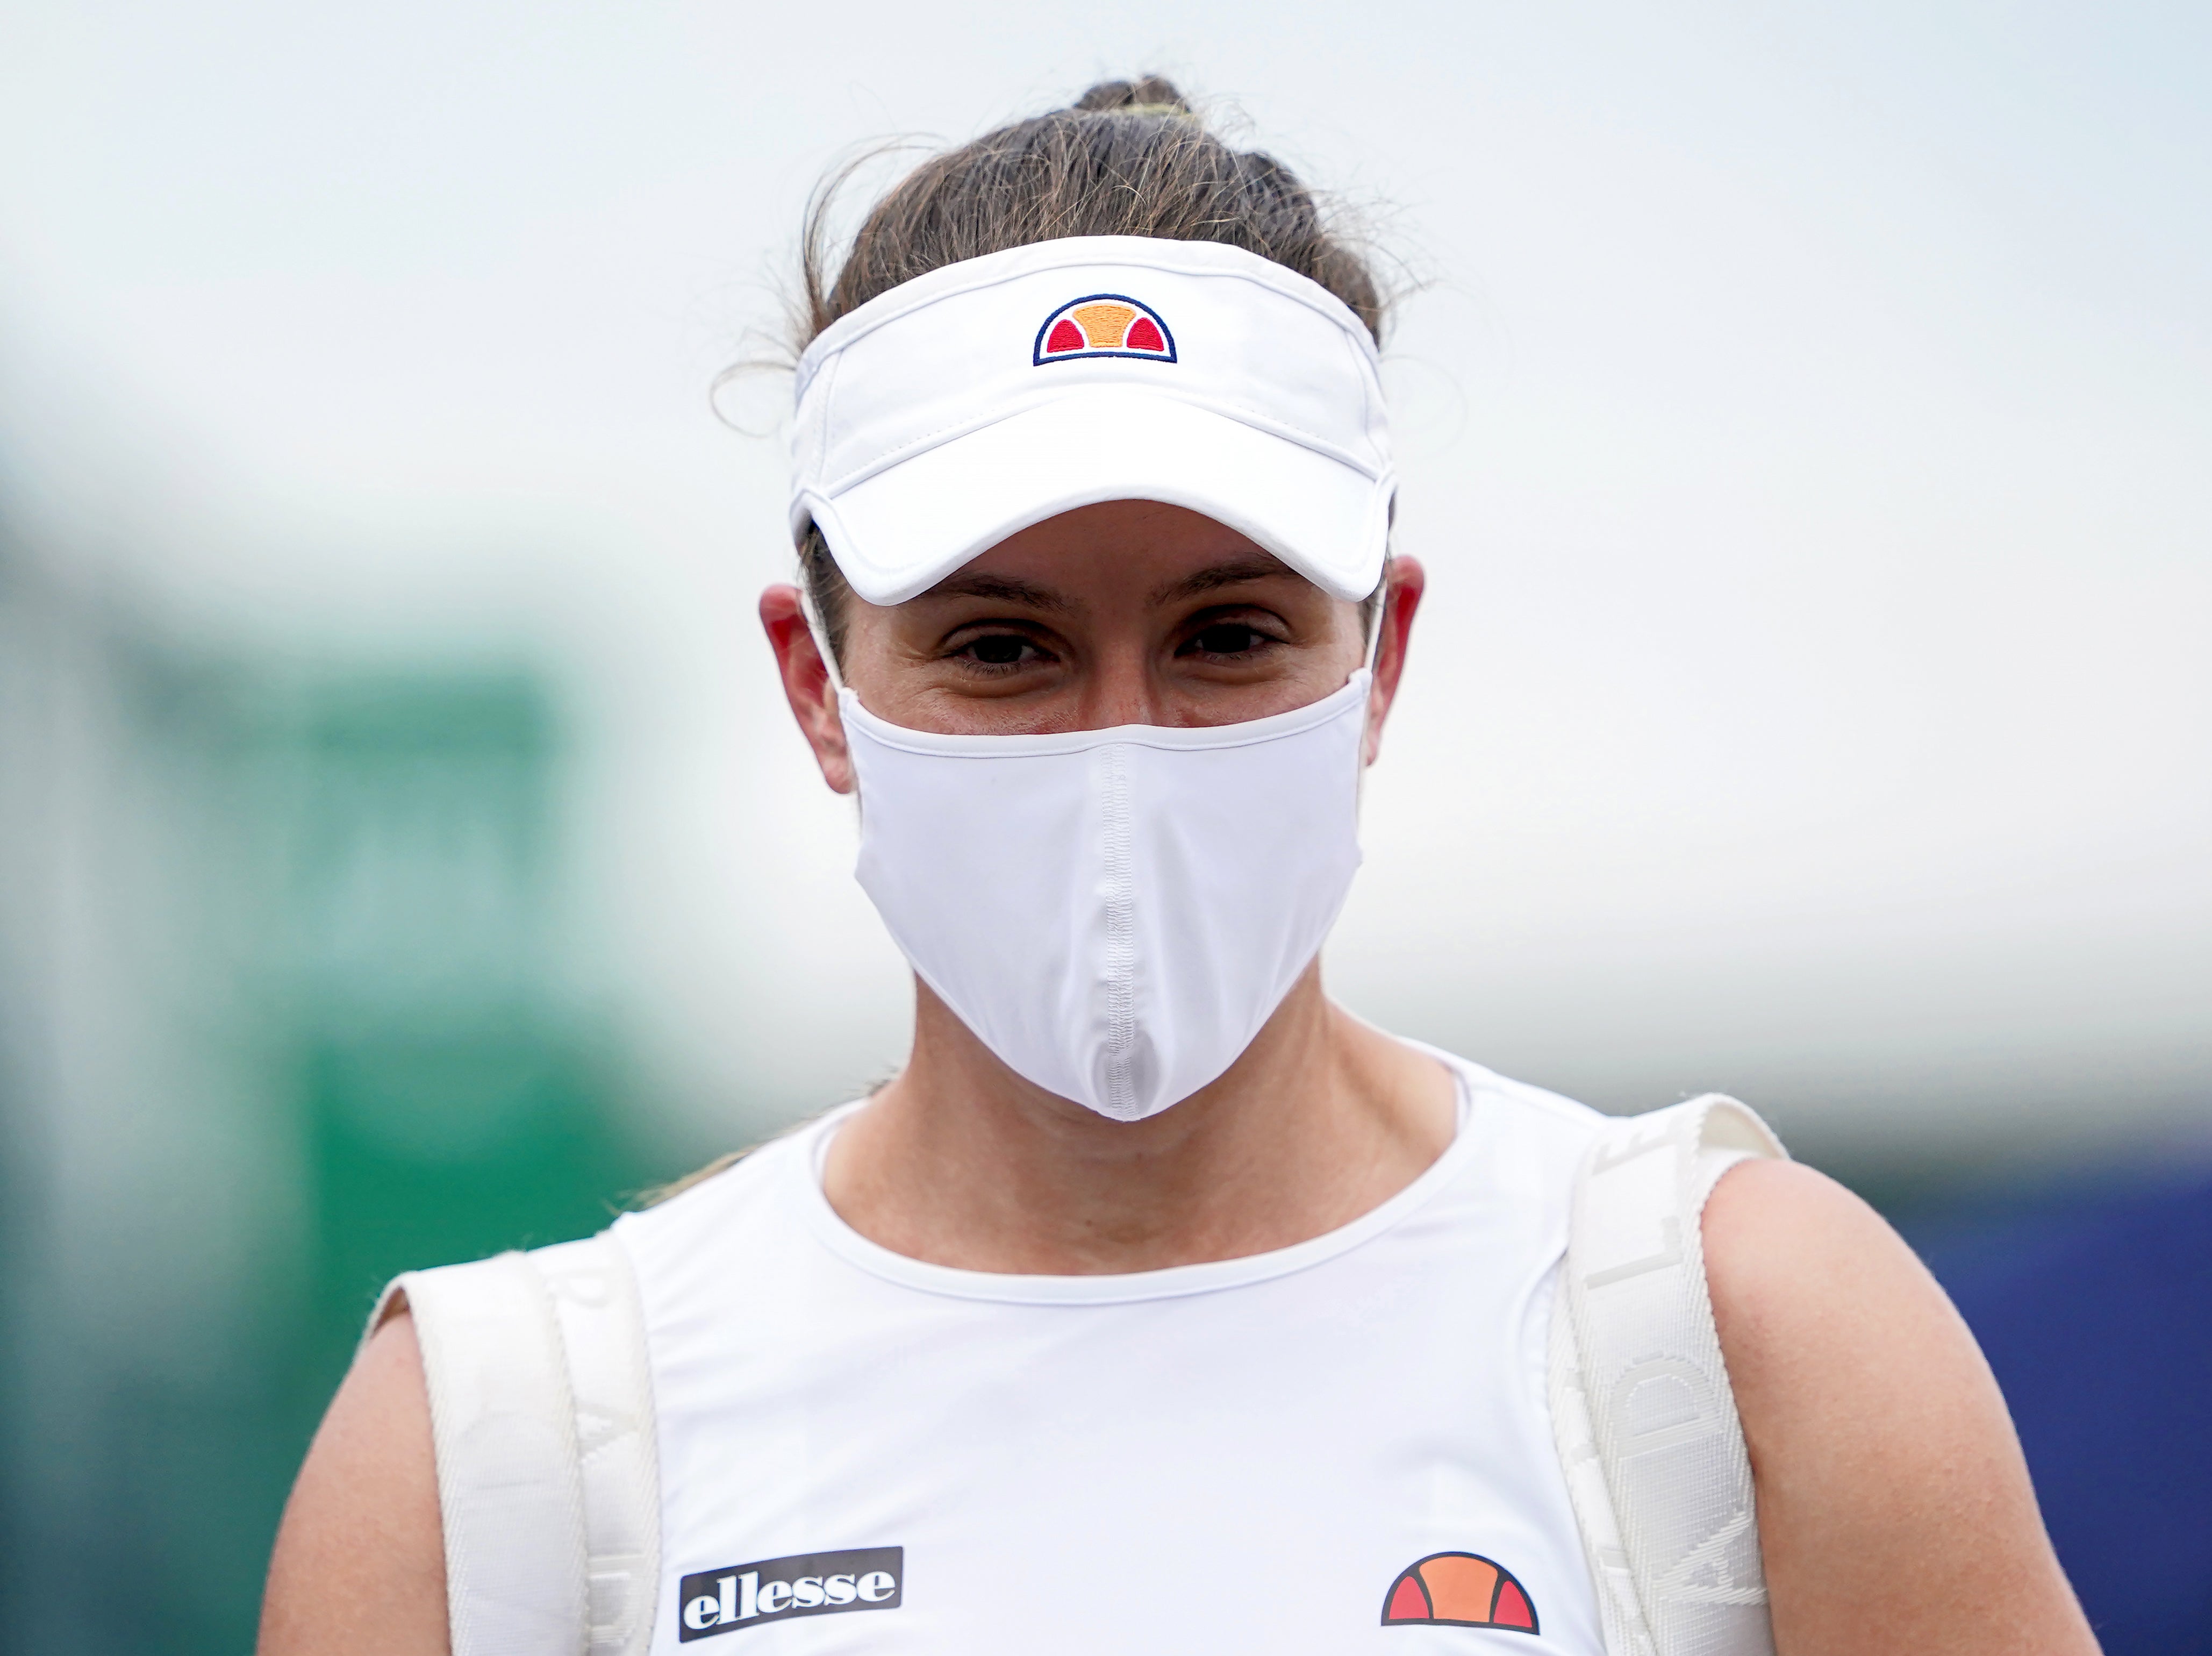 Johanna Konta is out of Wimbledon after a member of her team tested positive for coronavirus